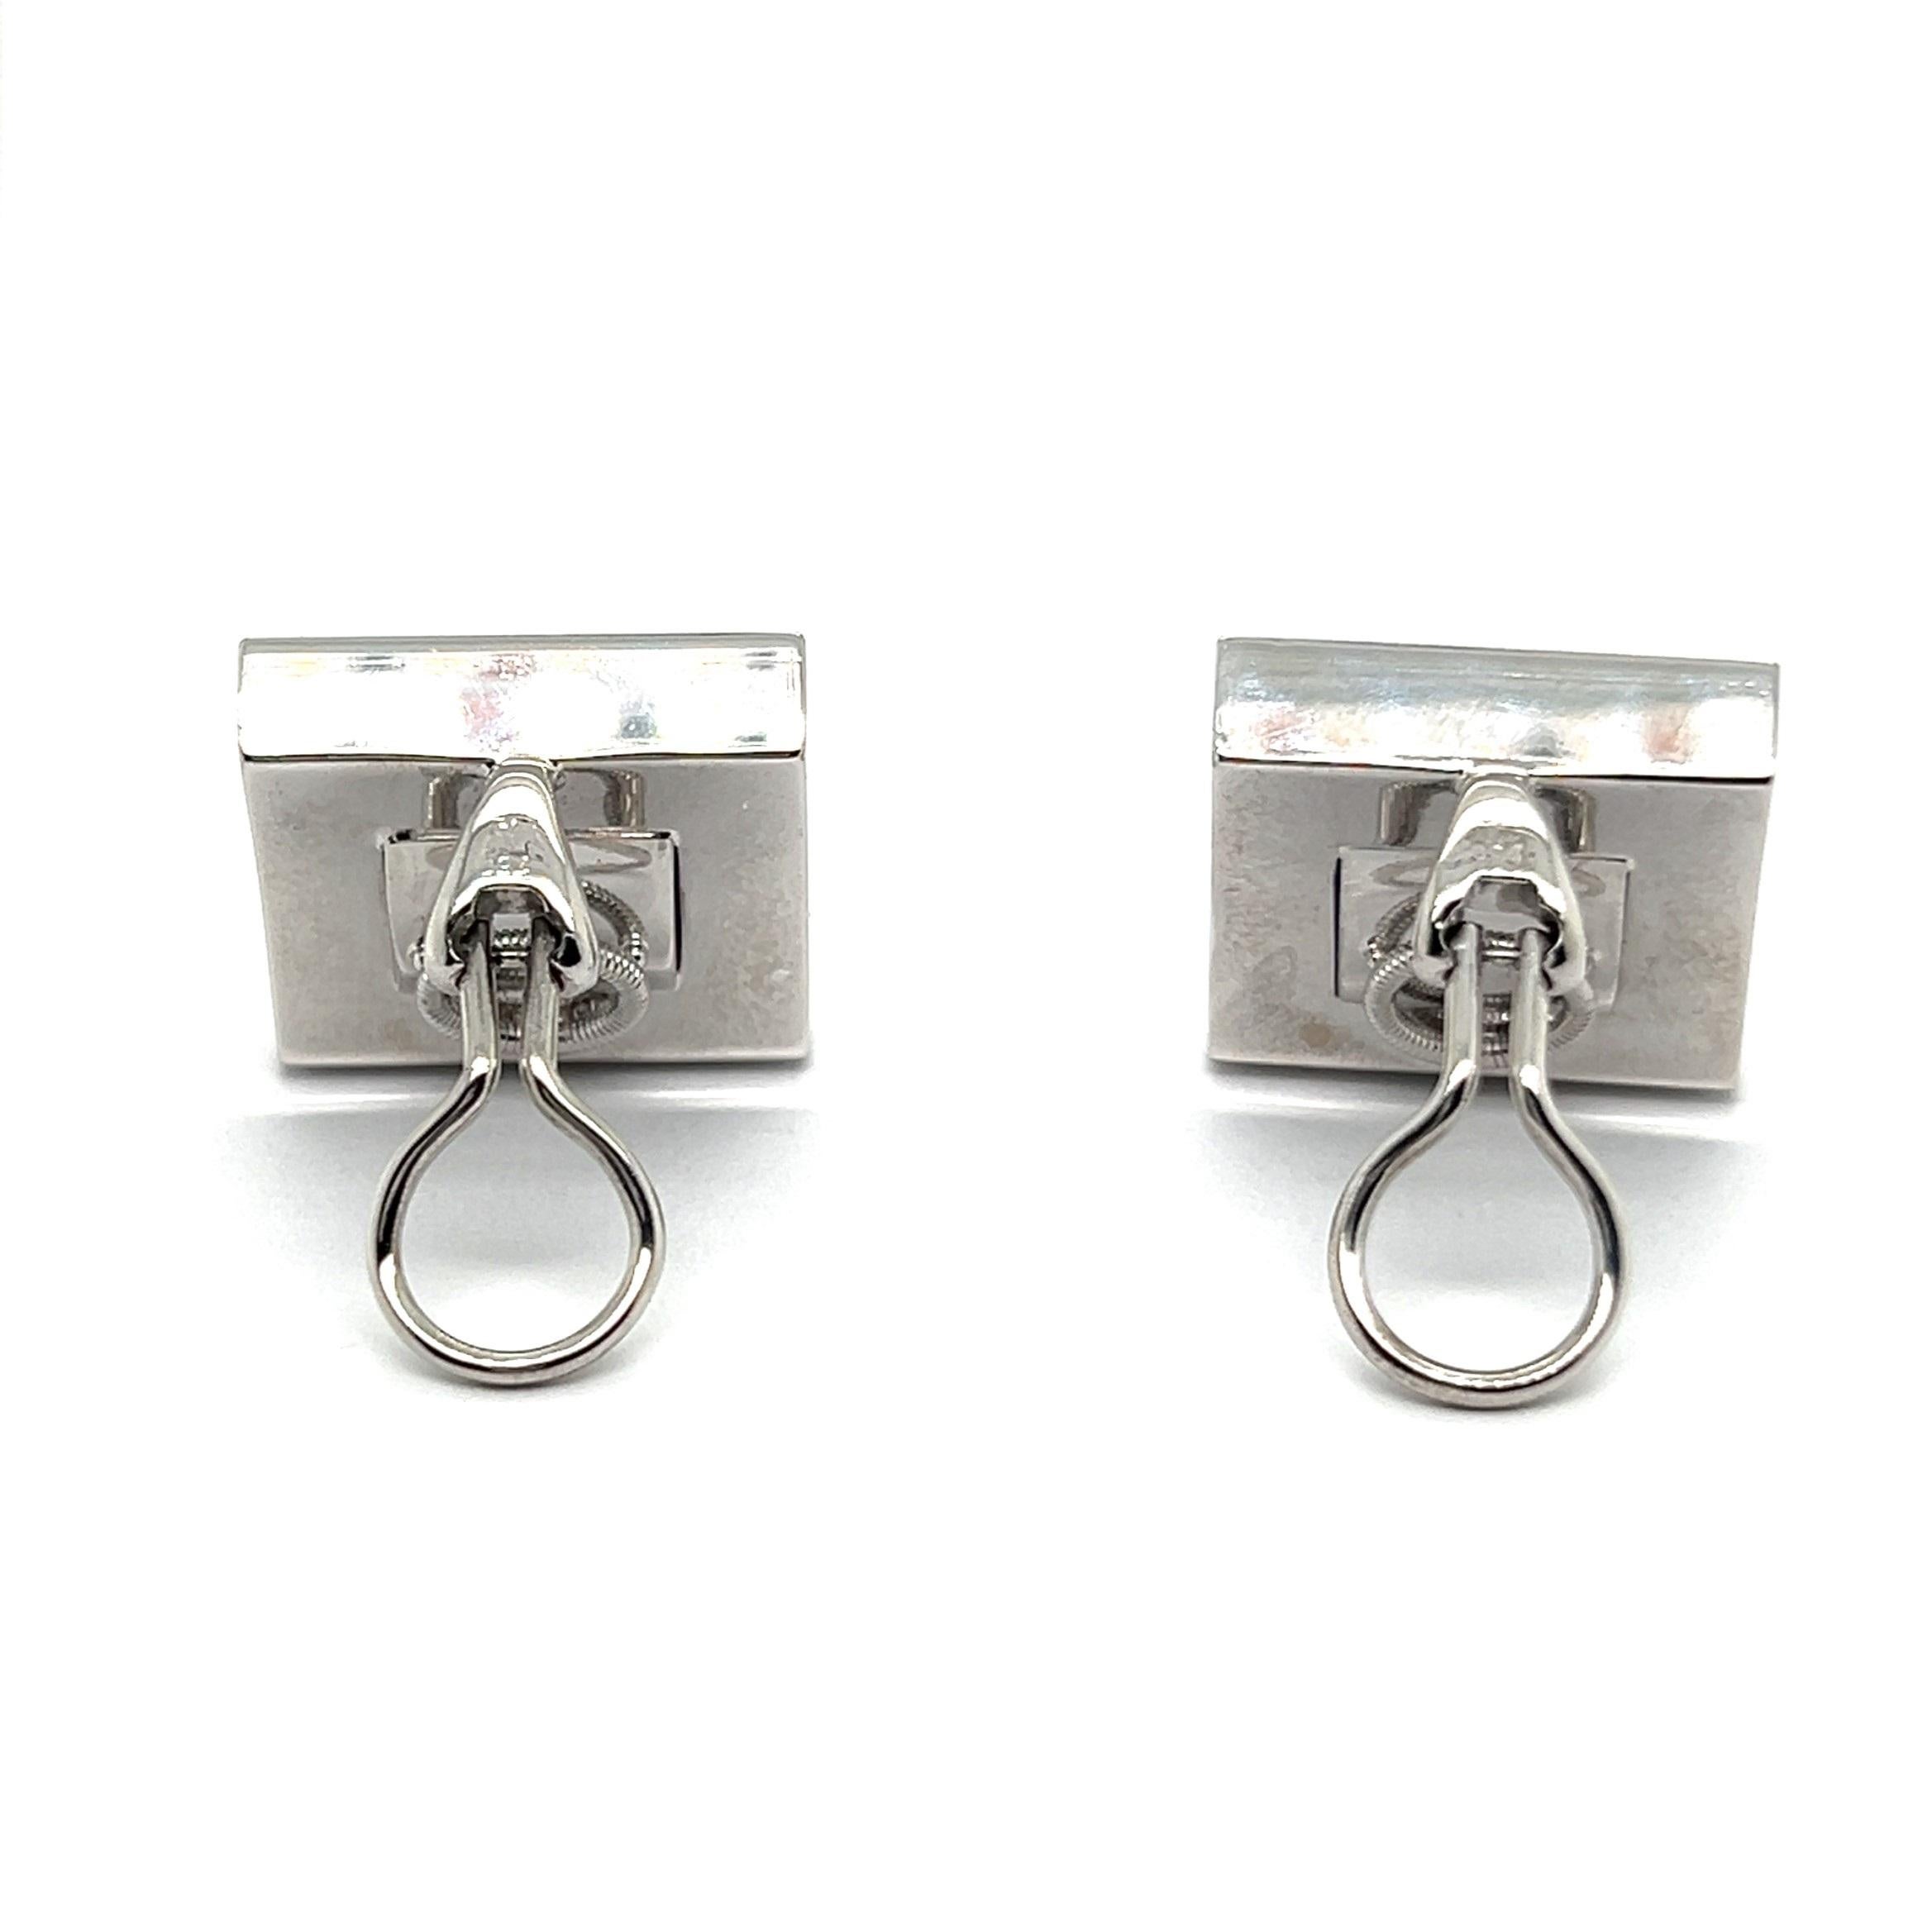  Bold Graphic Earrings with Diamonds in 18 Karat White Gold by Majo Fruithof 1